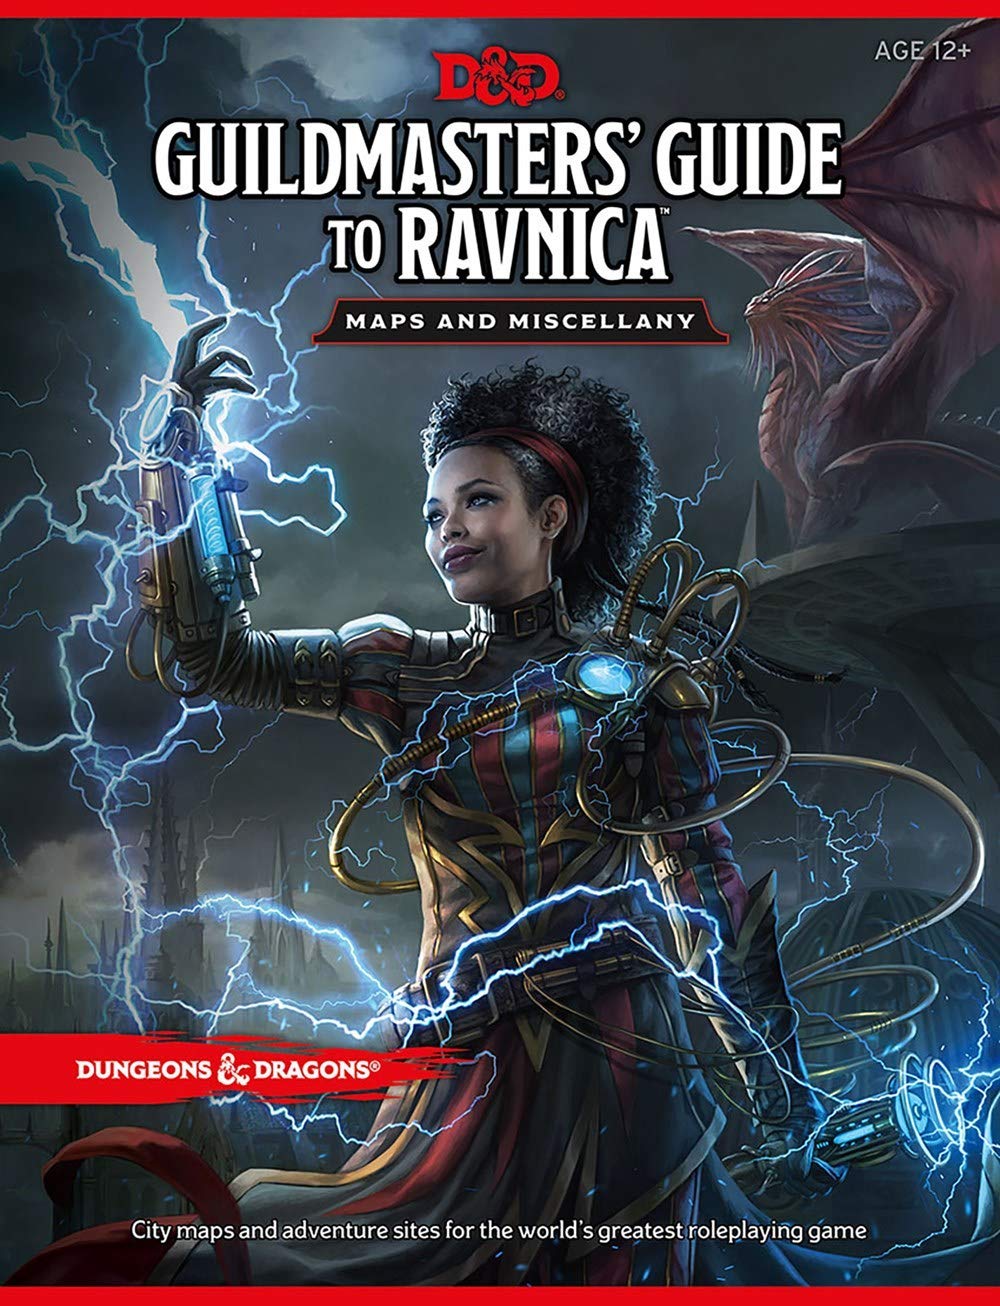 D&D RPG: Guildmasters' Guide to Ravnica - Maps and Miscellany